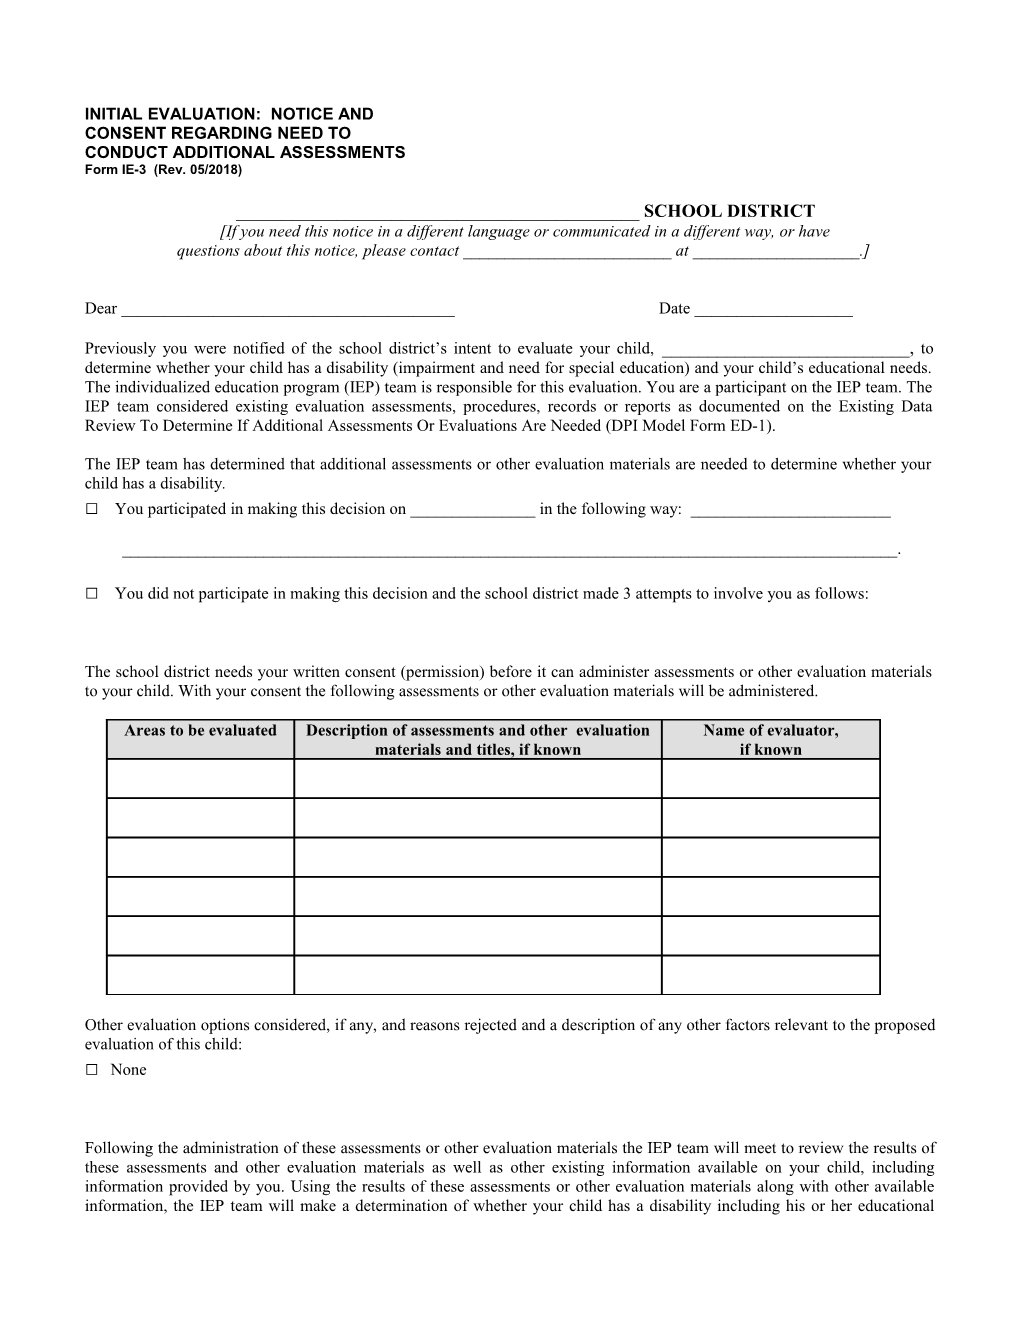 Sample Special Education Forms: IE-3